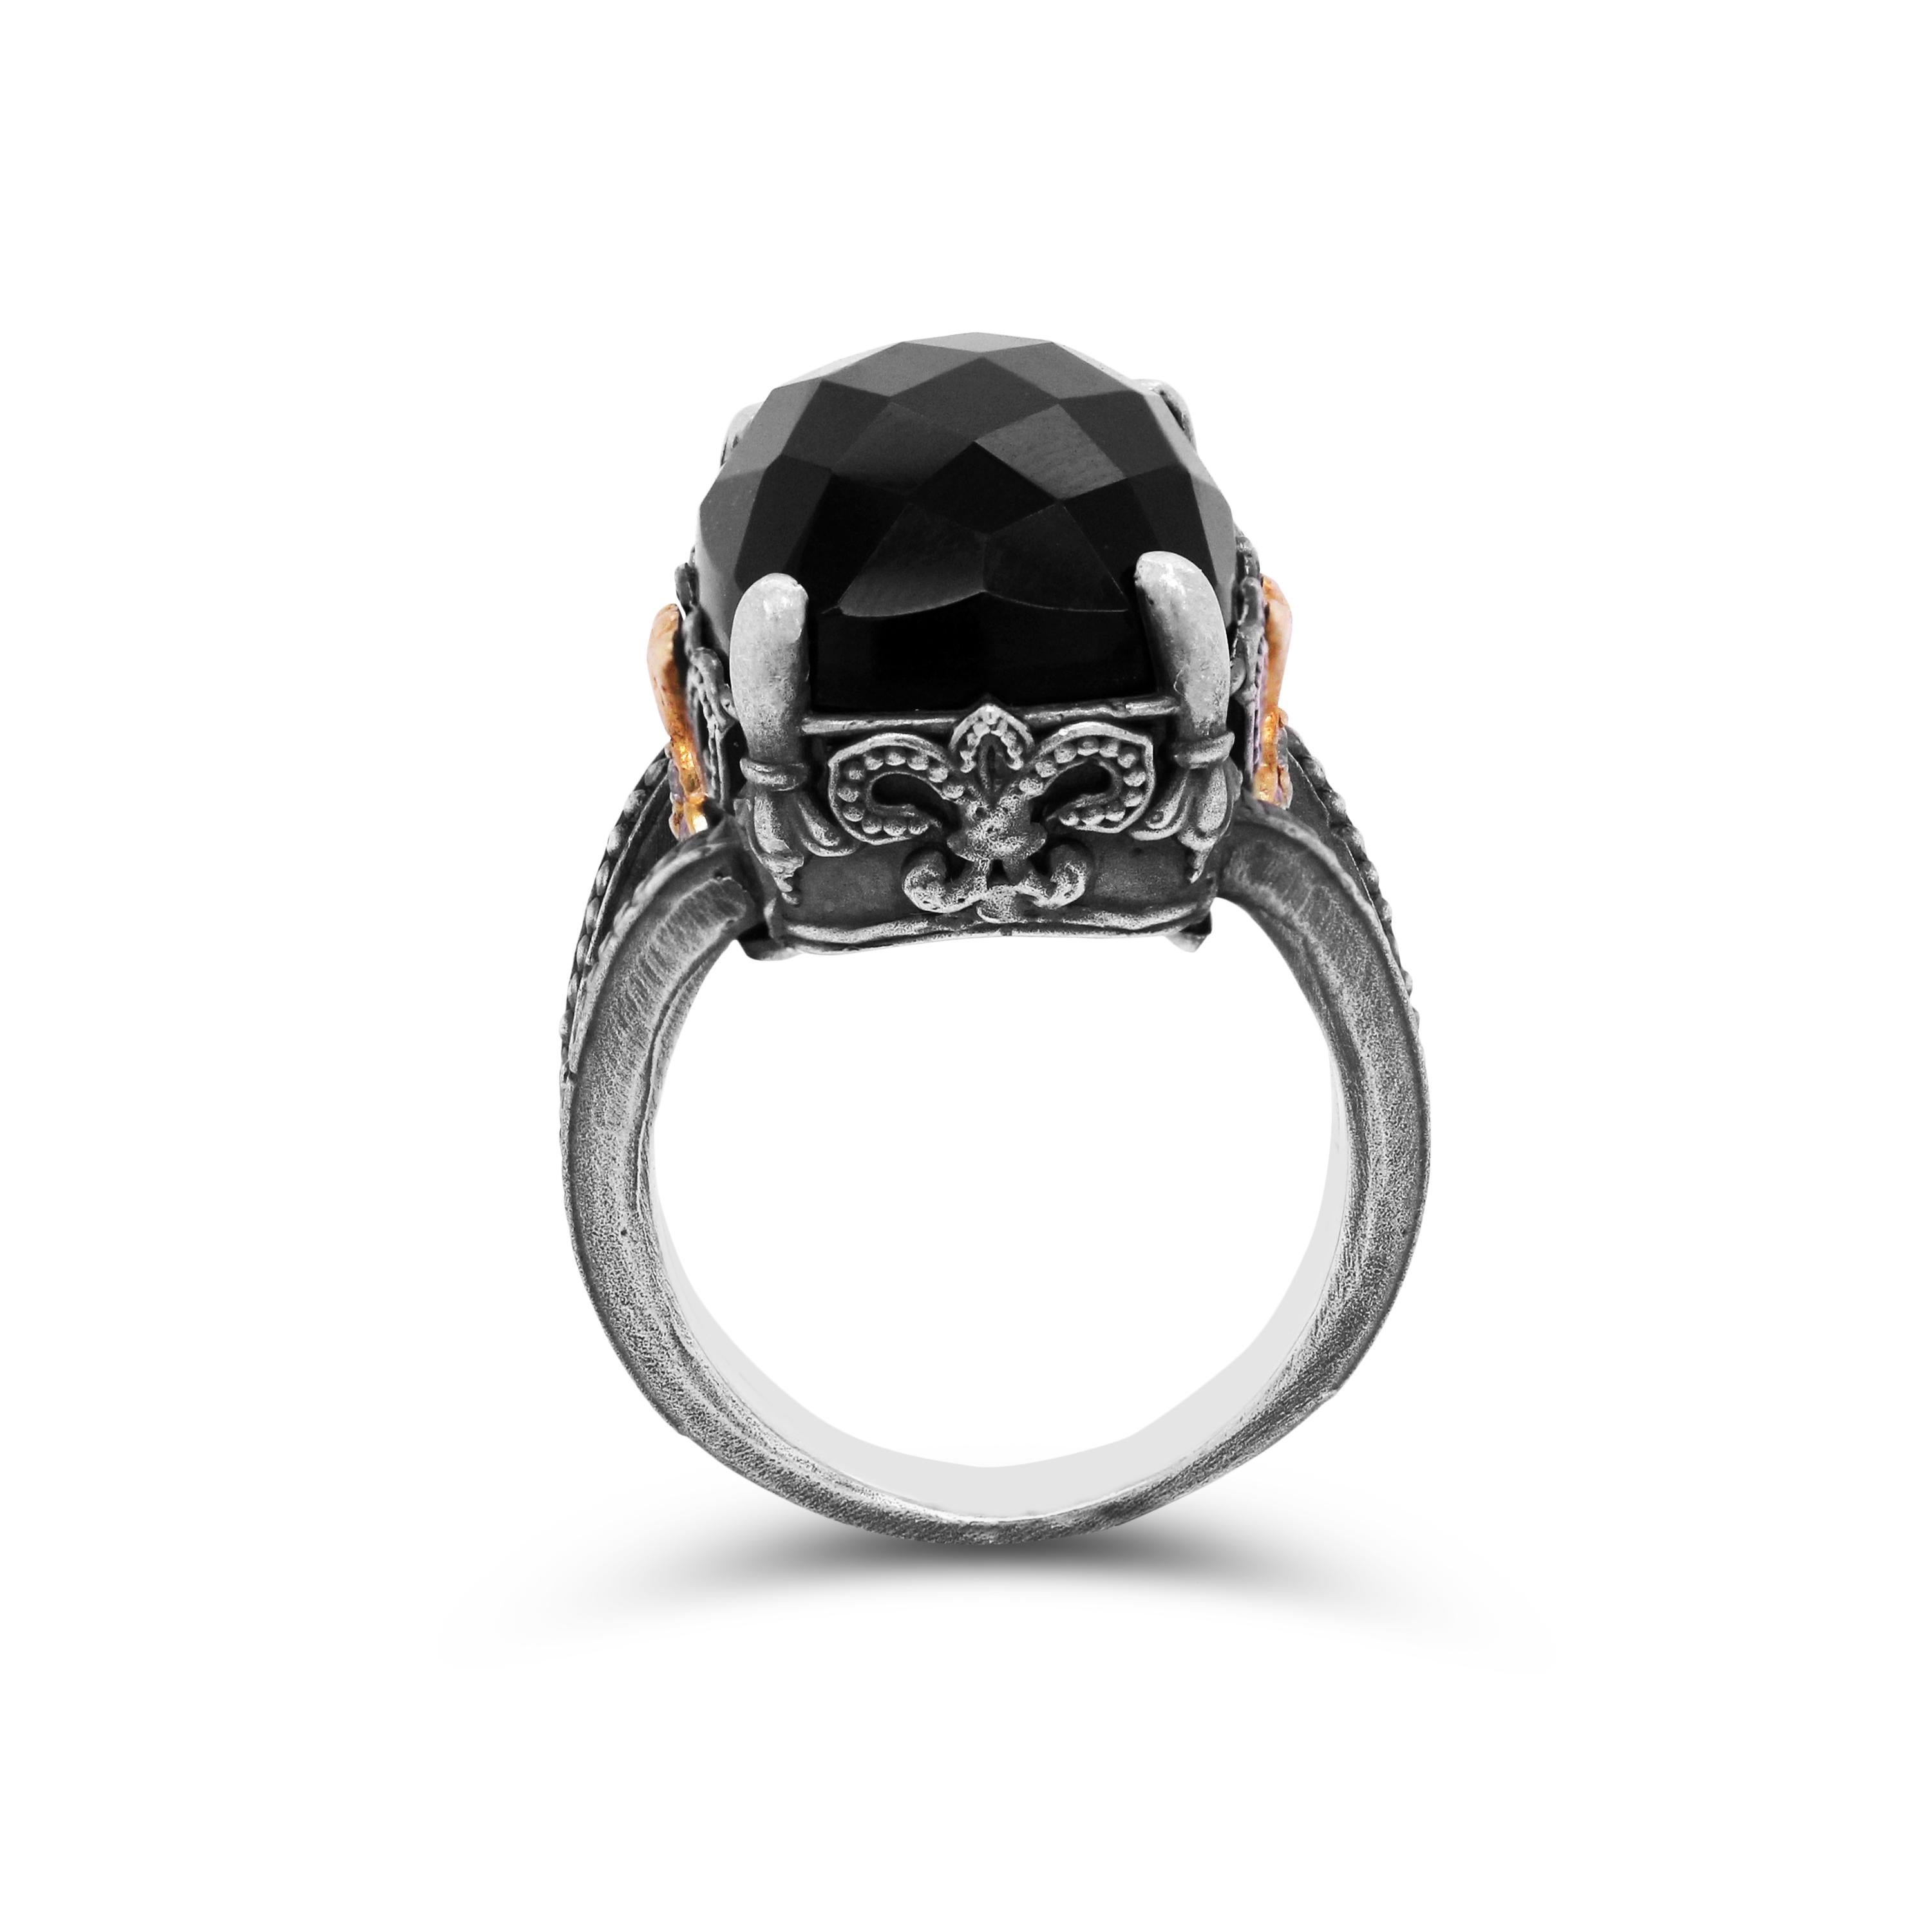 Aged Silver and 18K Gold Ring with Diamonds and Black Onyx center by Stambolian

This unique ring is from the 